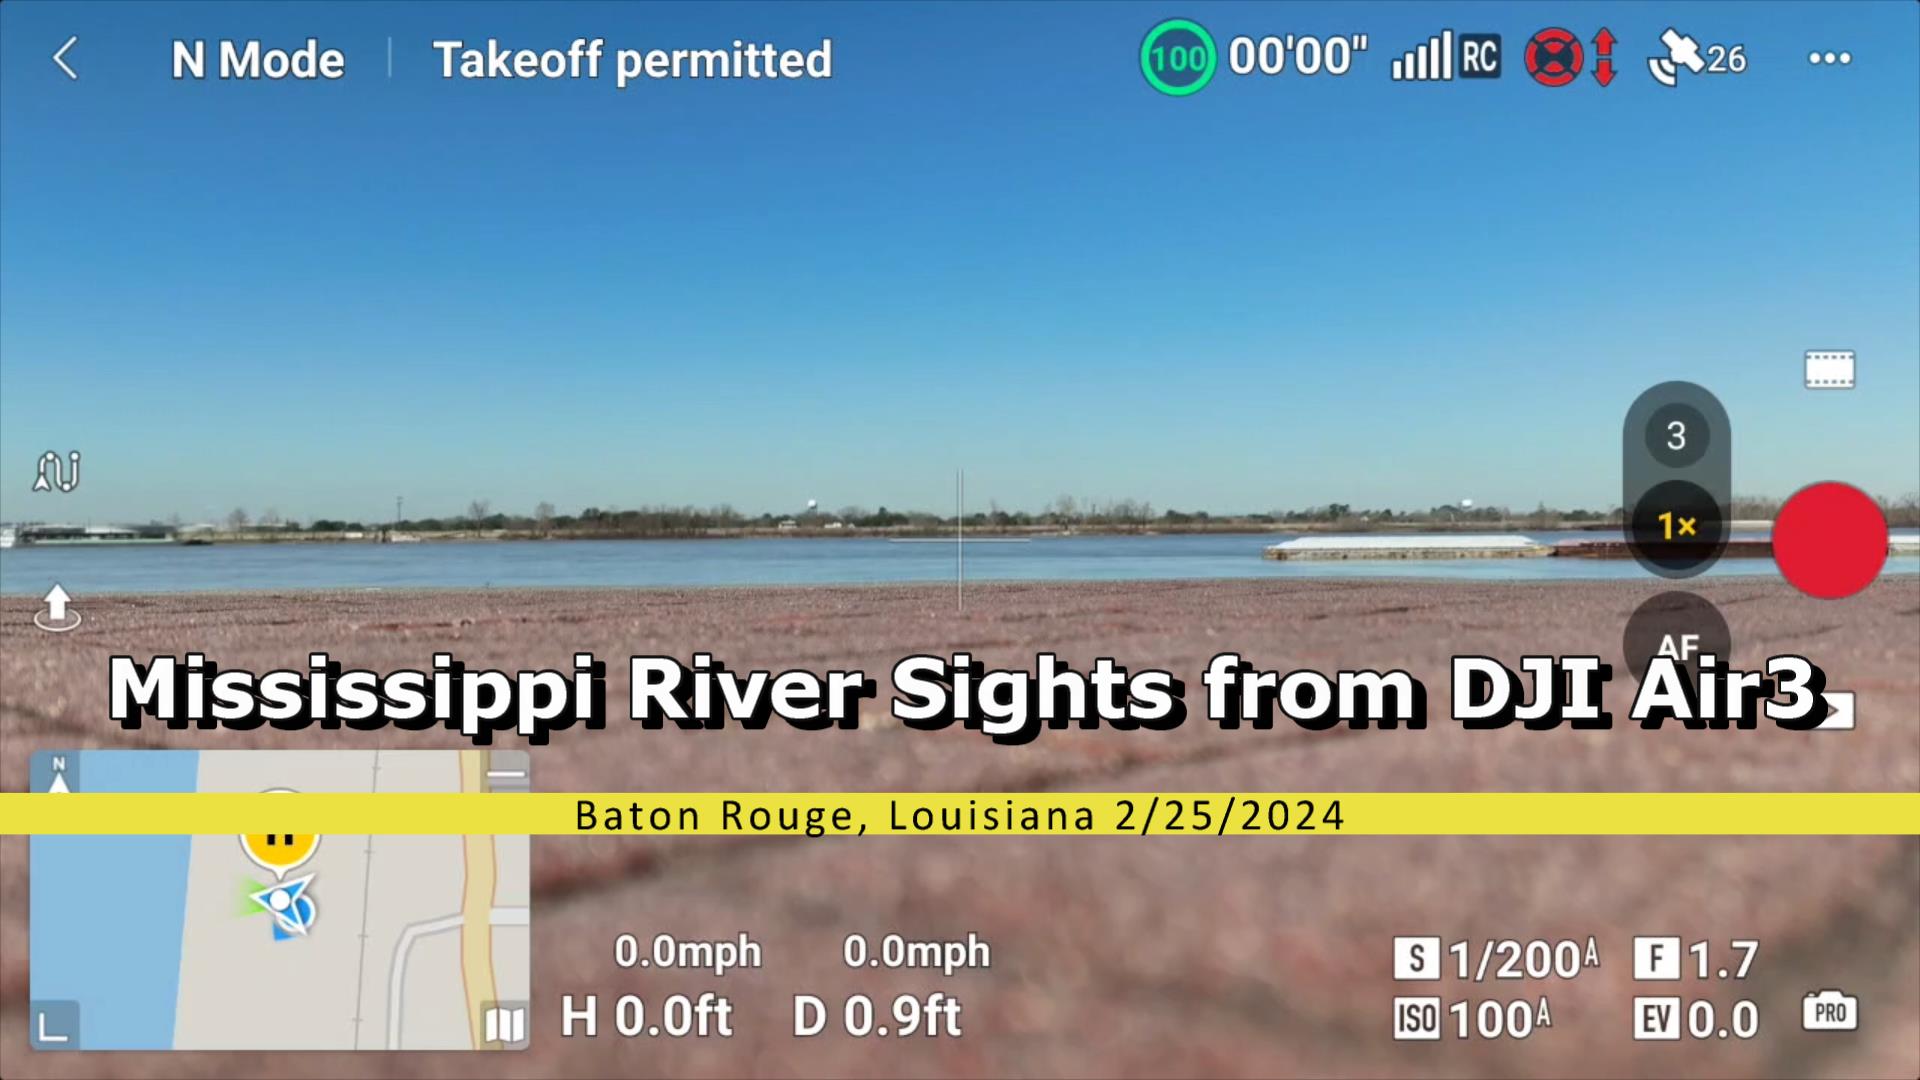 Mississippi River Sights From DJI Air 3